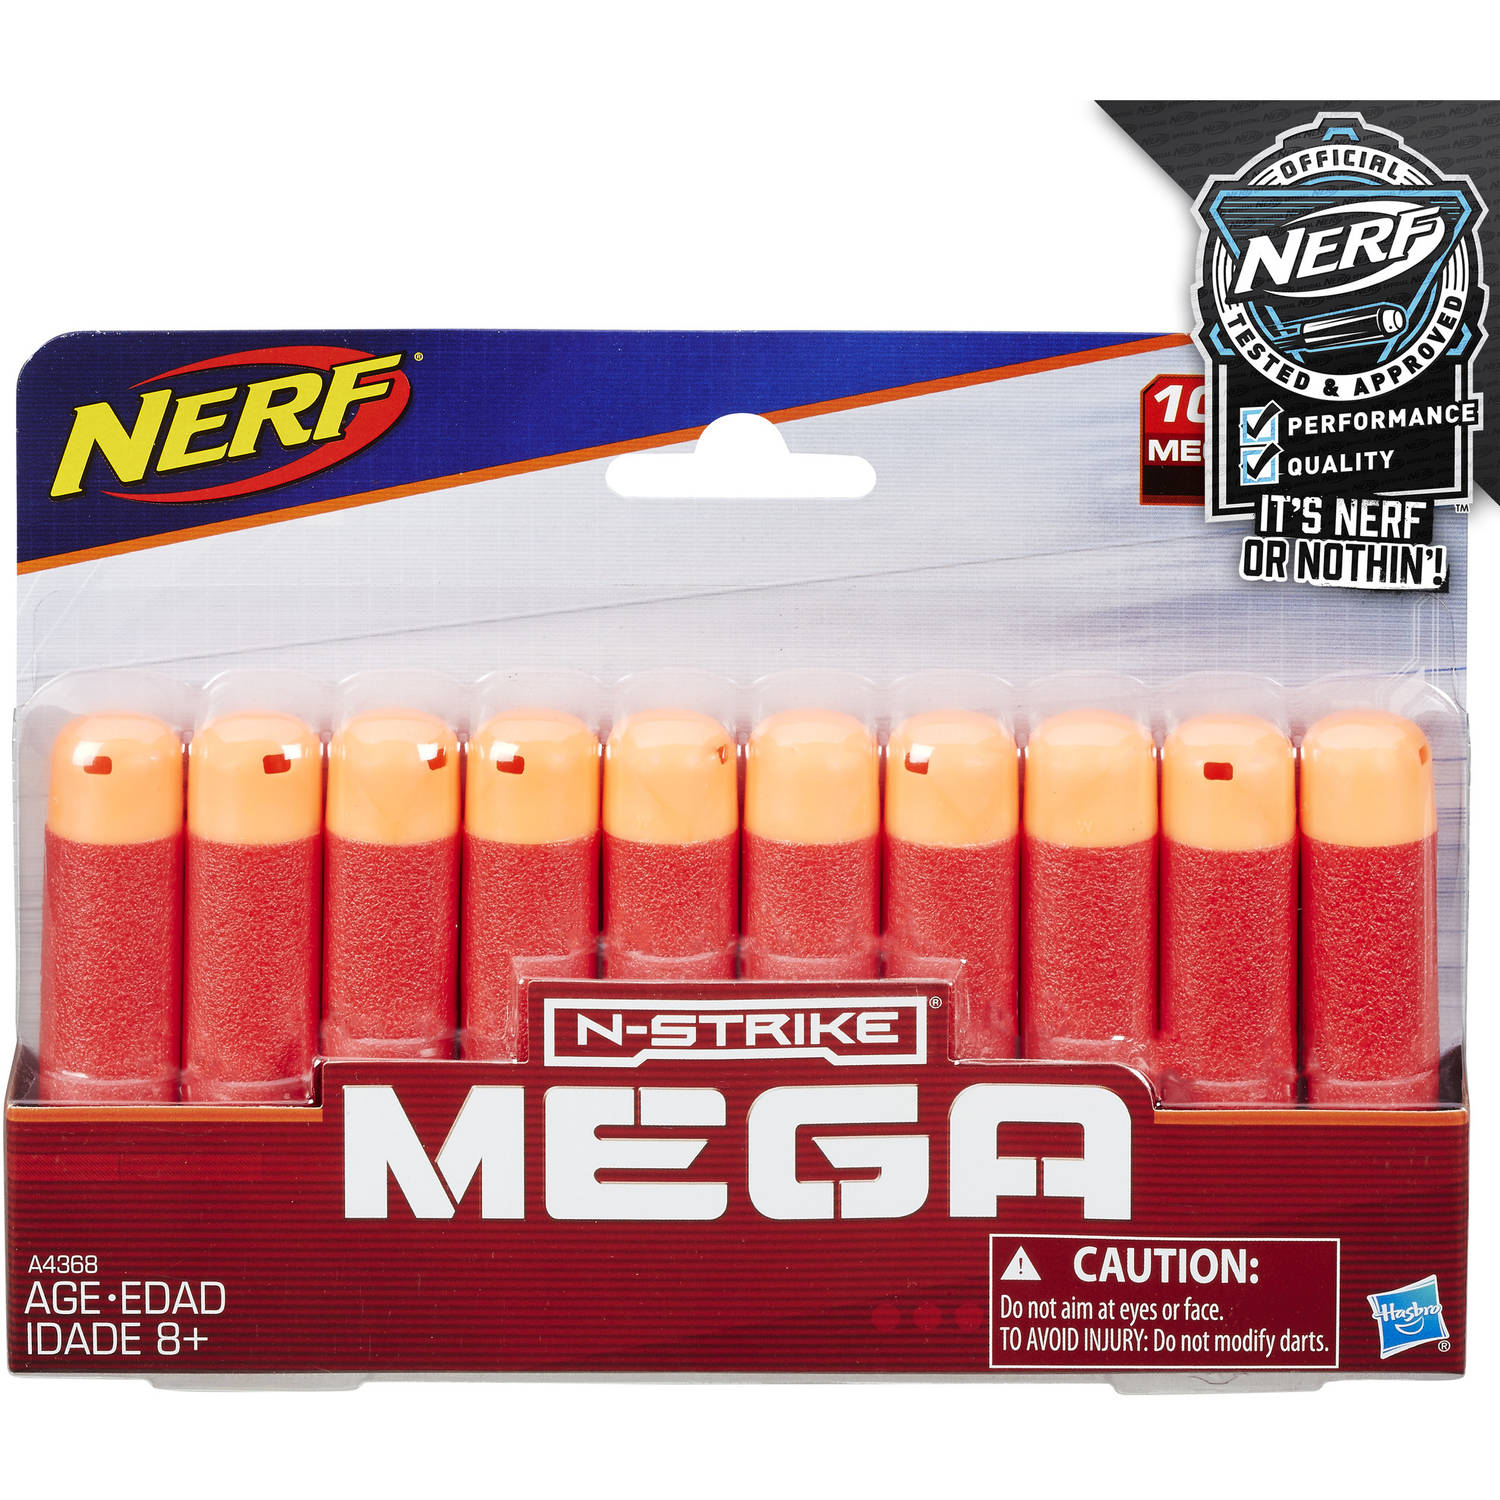 Nerf N-Strike Mega Dart Refill (10 pack), for Ages 8 and Up - image 1 of 4